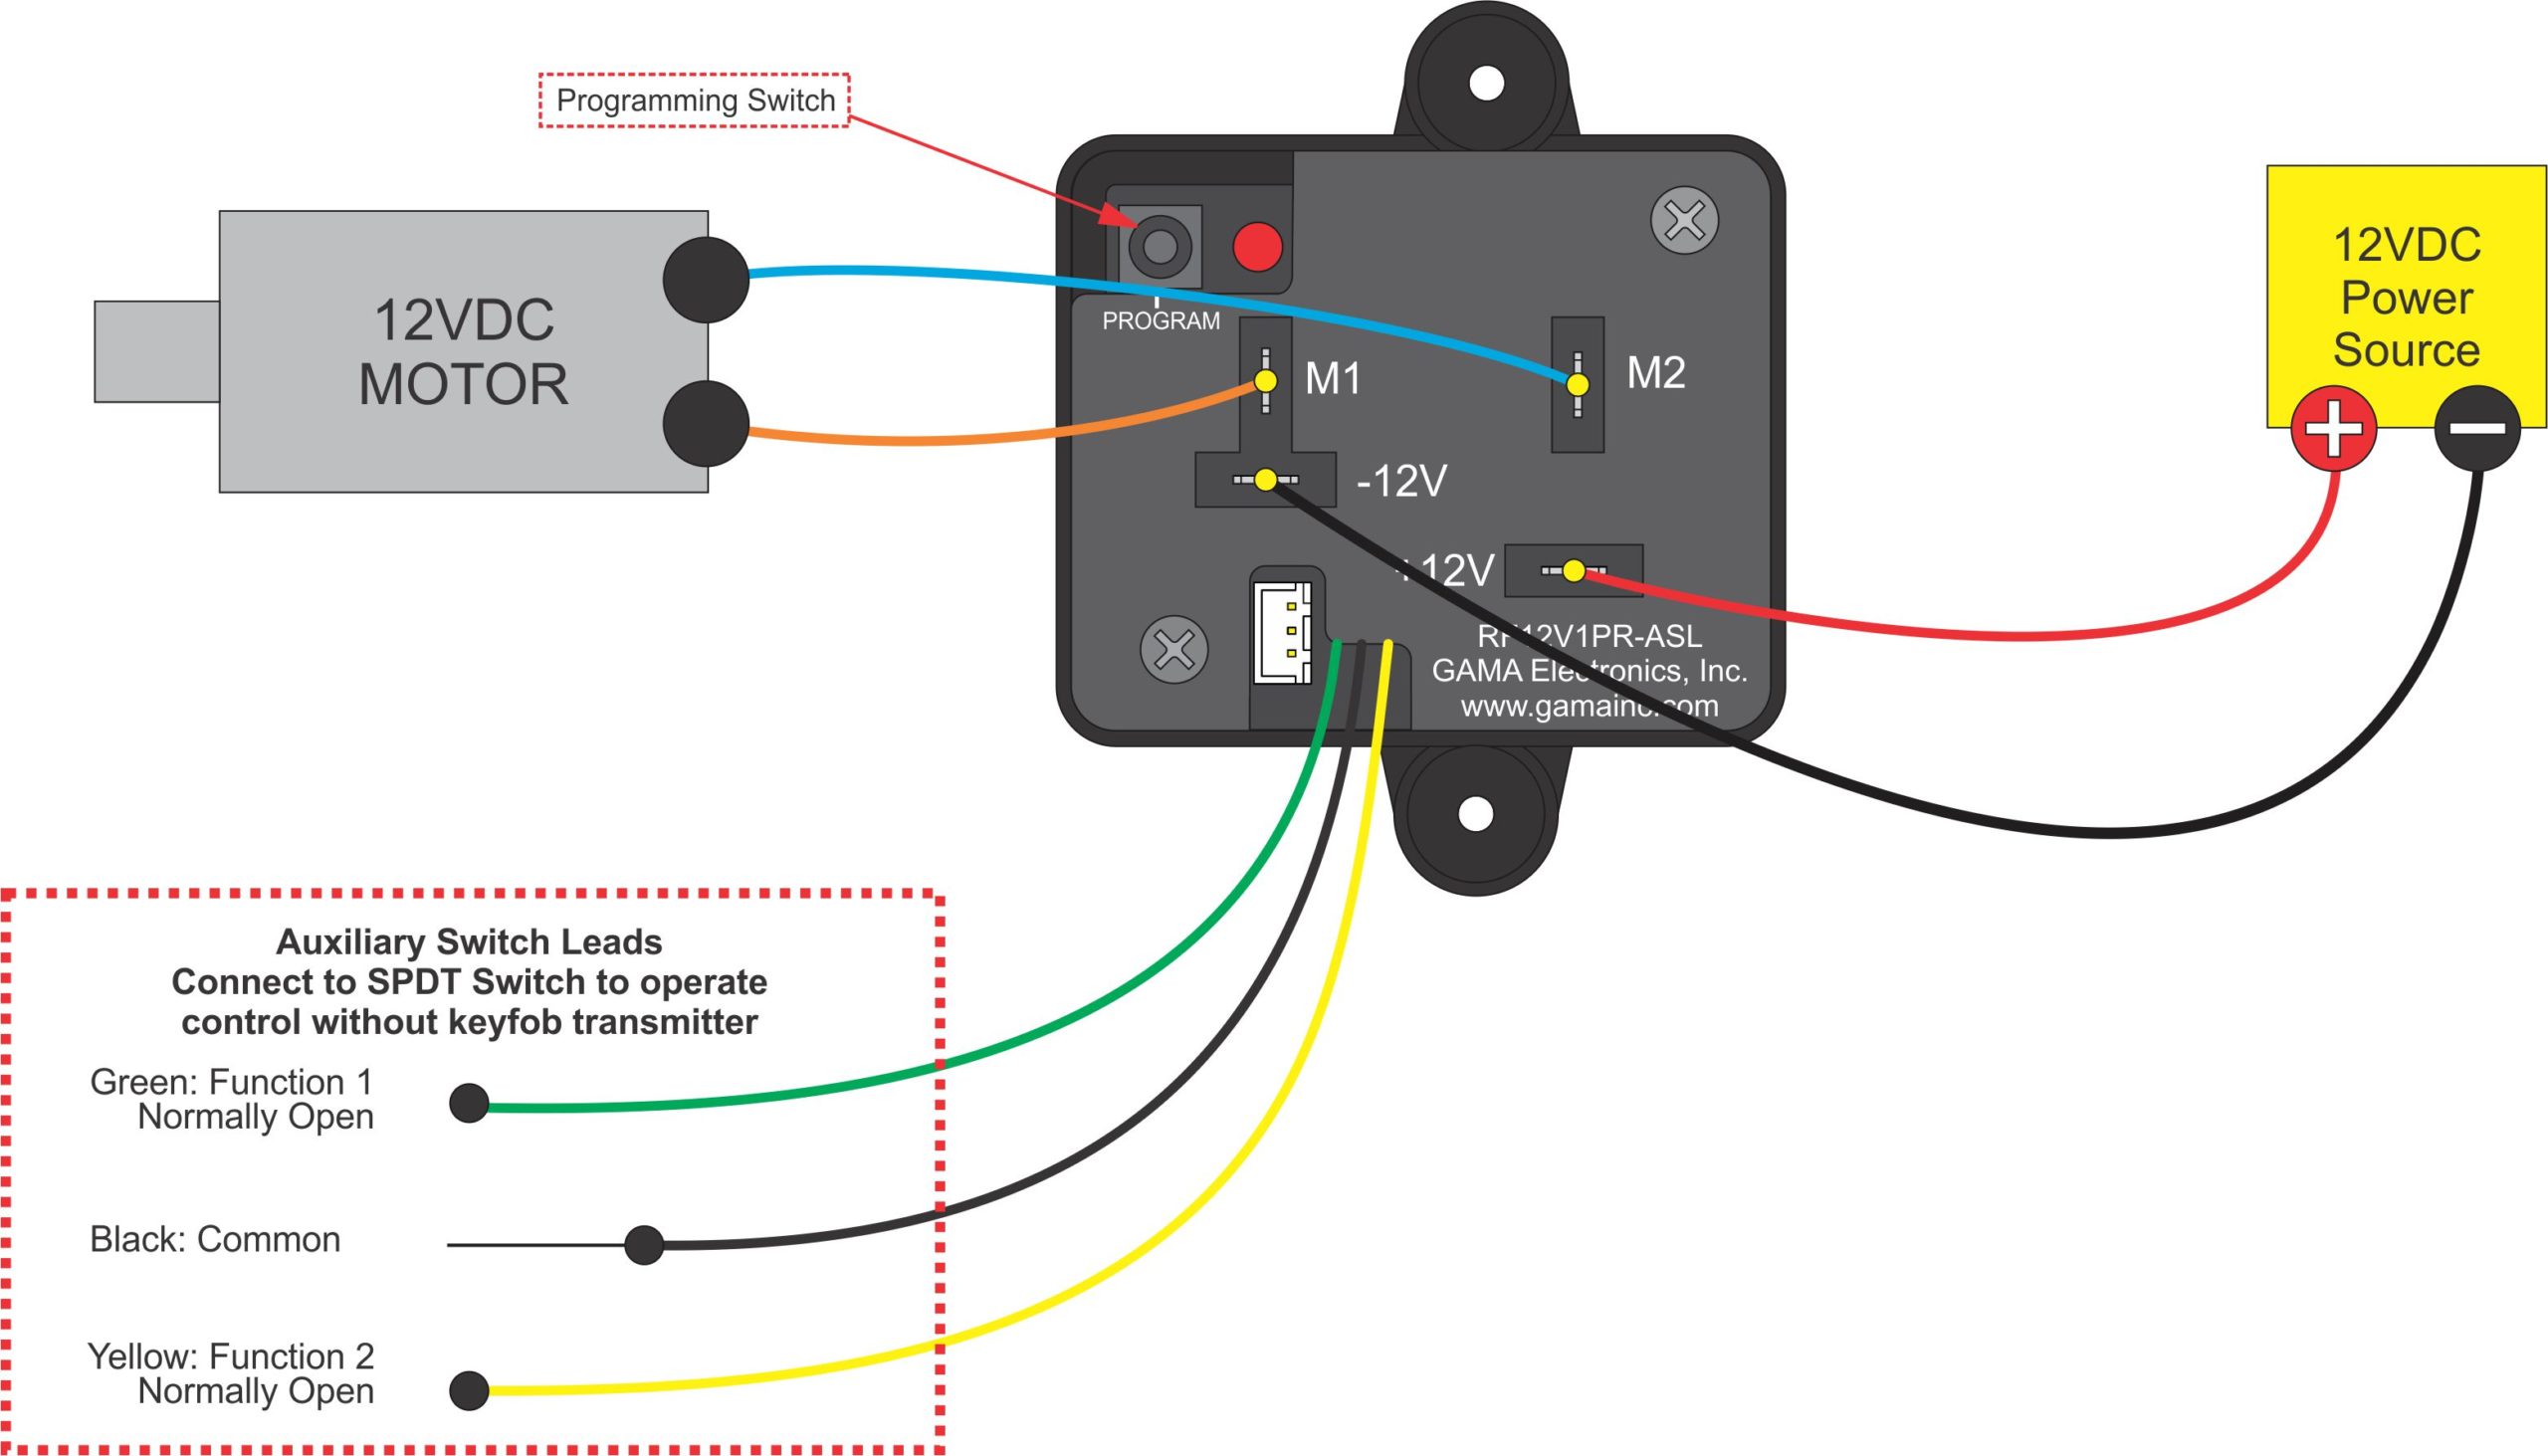 12VDC Polarity Reversing Remote Control with Speed Control 